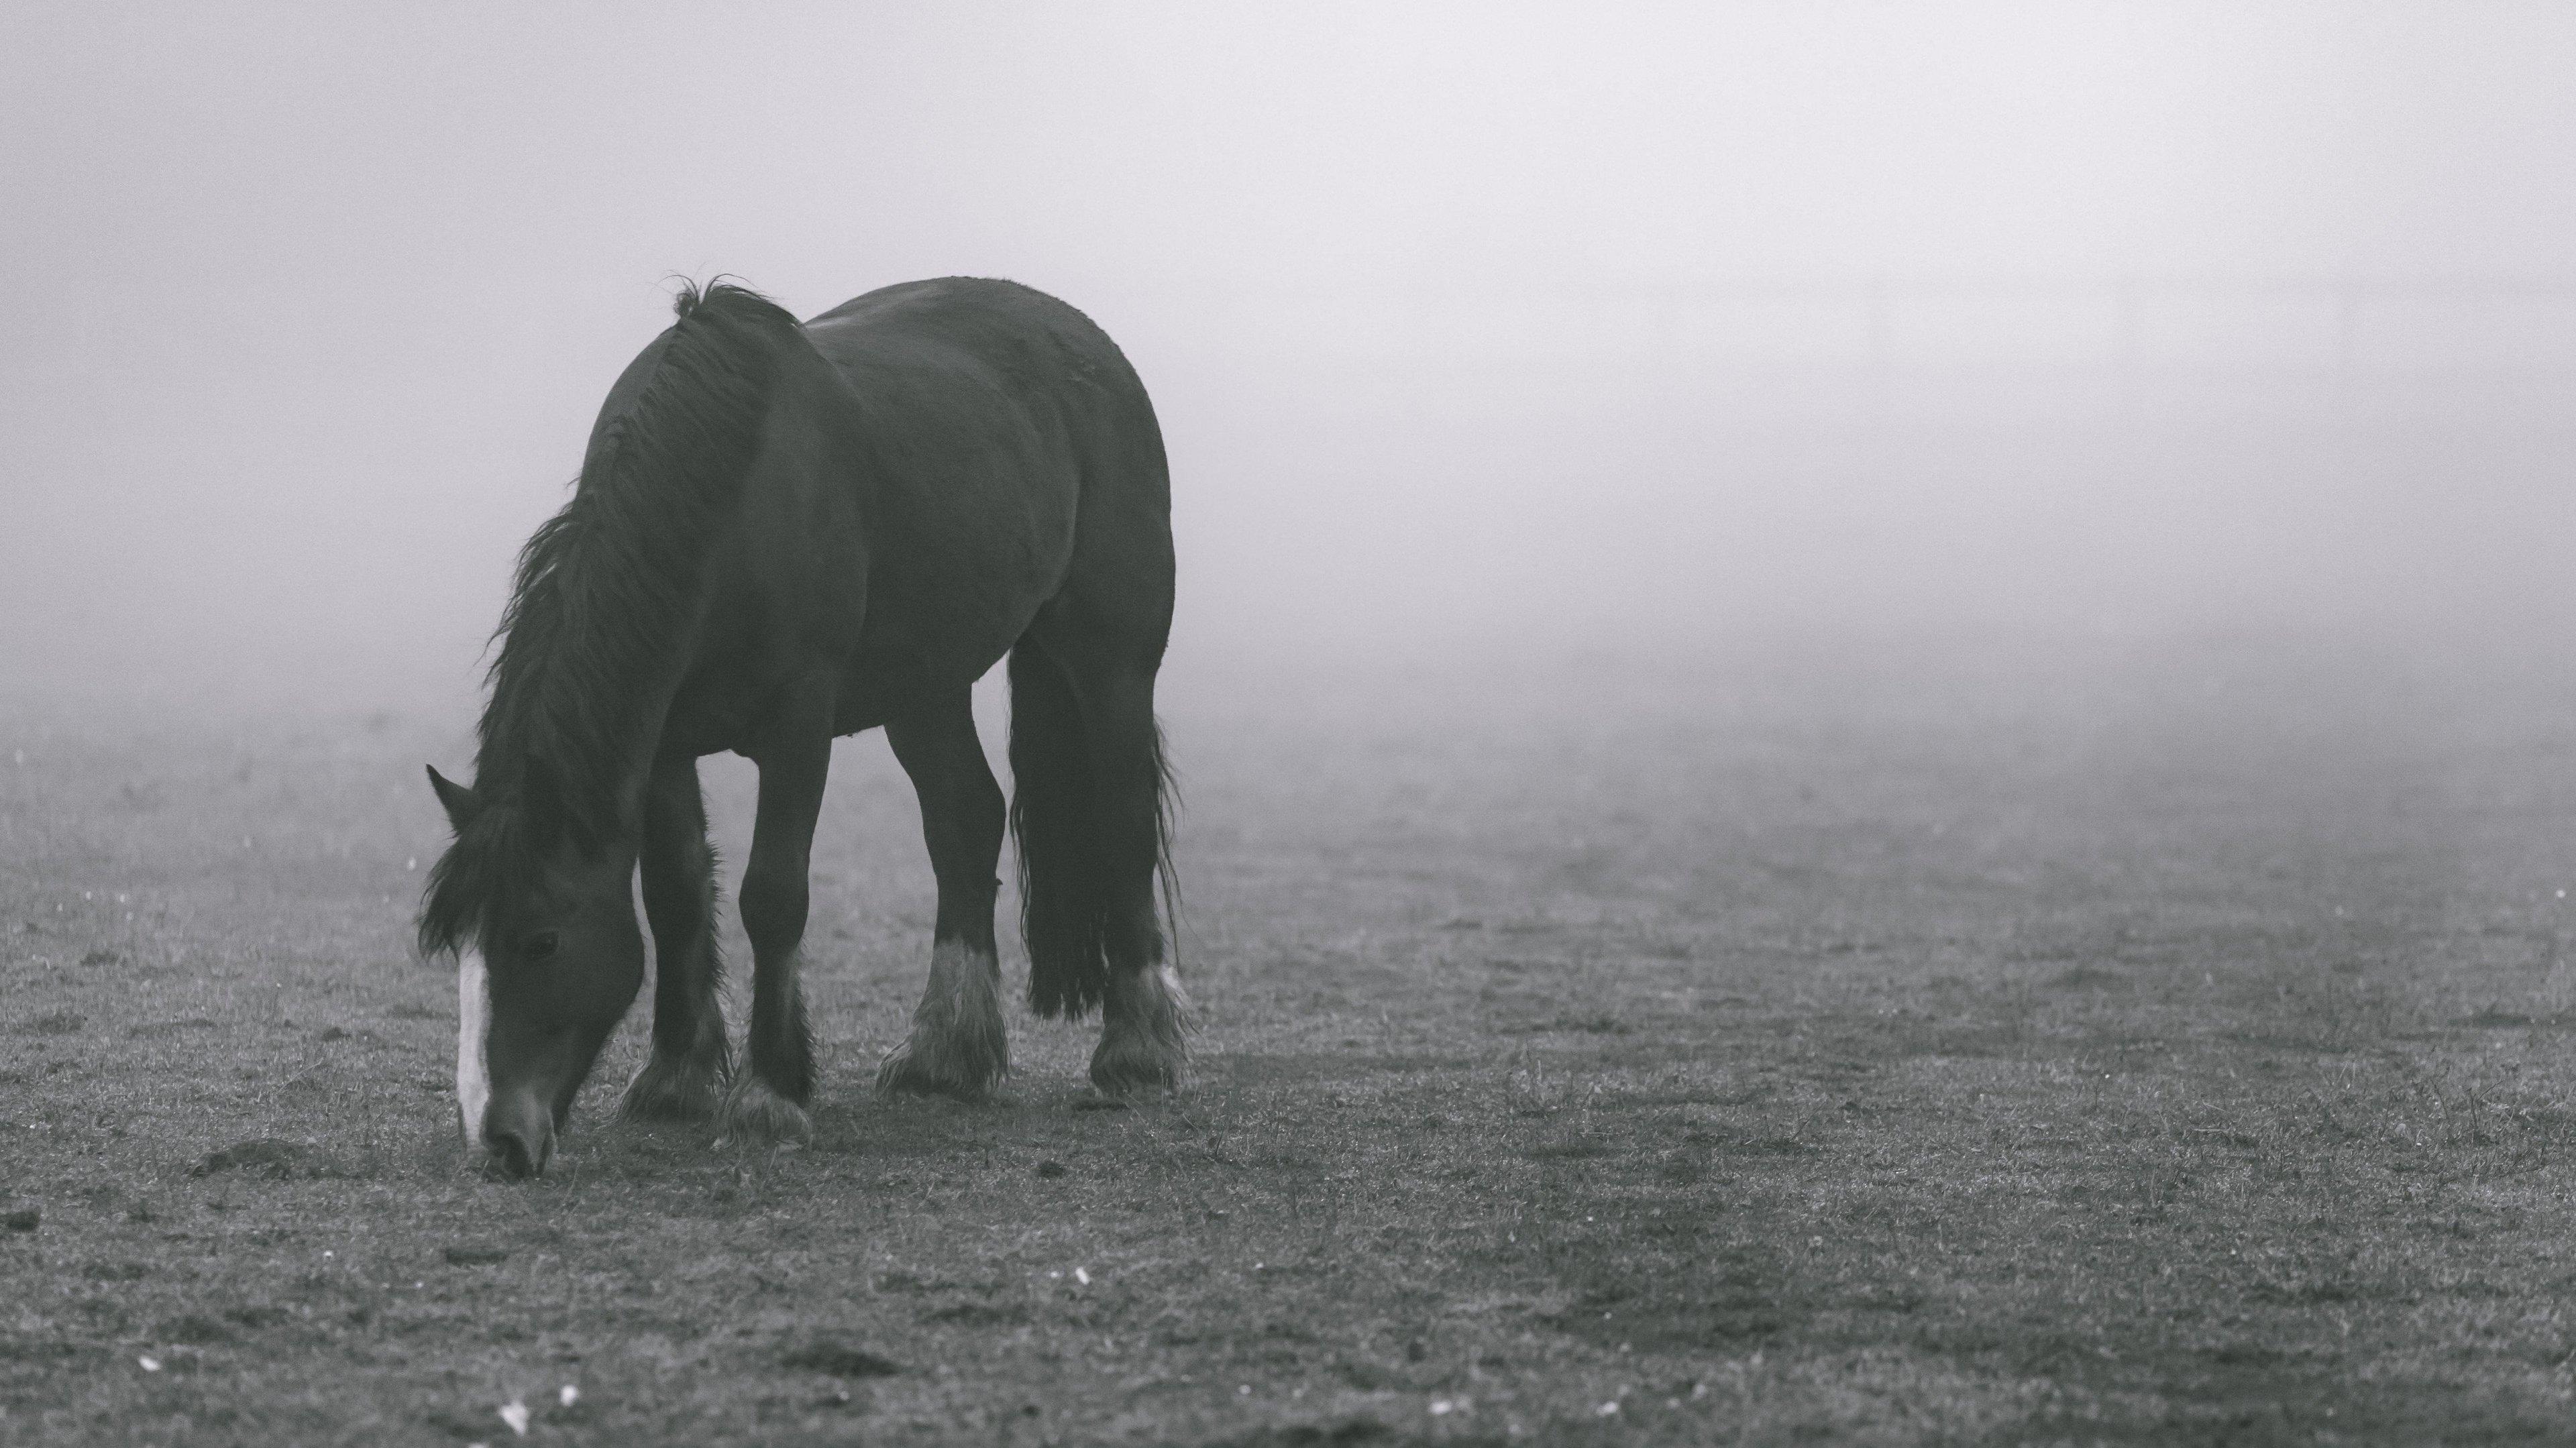 Horse In Fog Wallpaper iPhone Android Desktop Background